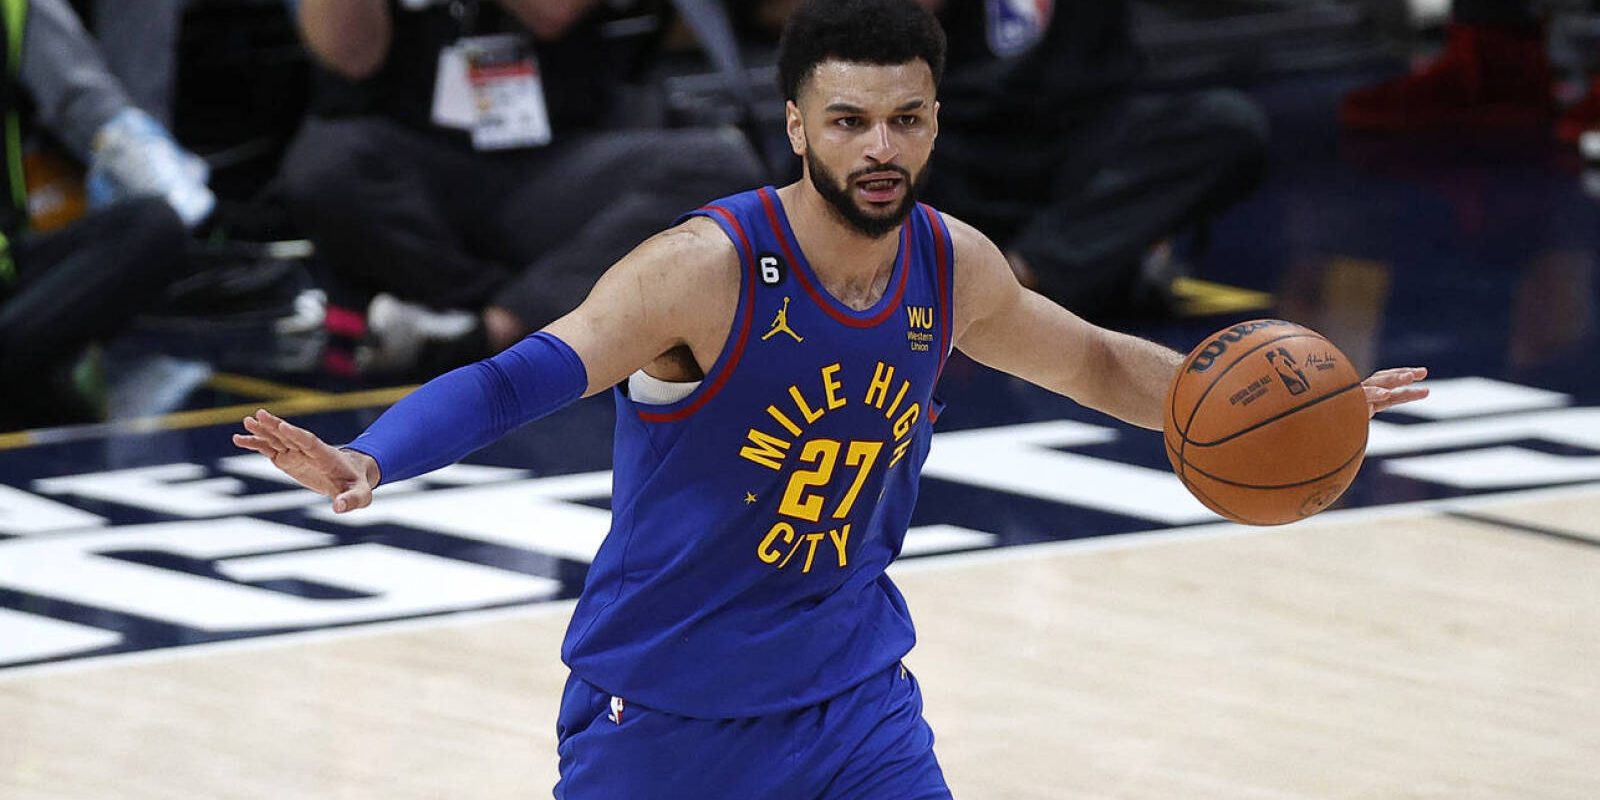 Jun 1, 2023; Denver, CO, USA; Denver Nuggets guard Jamal Murray (27) gestures while dribbling the ball against the Miami Heat during the second quarter in game one of the 2023 NBA Finals at Ball Arena. Mandatory Credit: Isaiah J. Downing-USA TODAY Sports